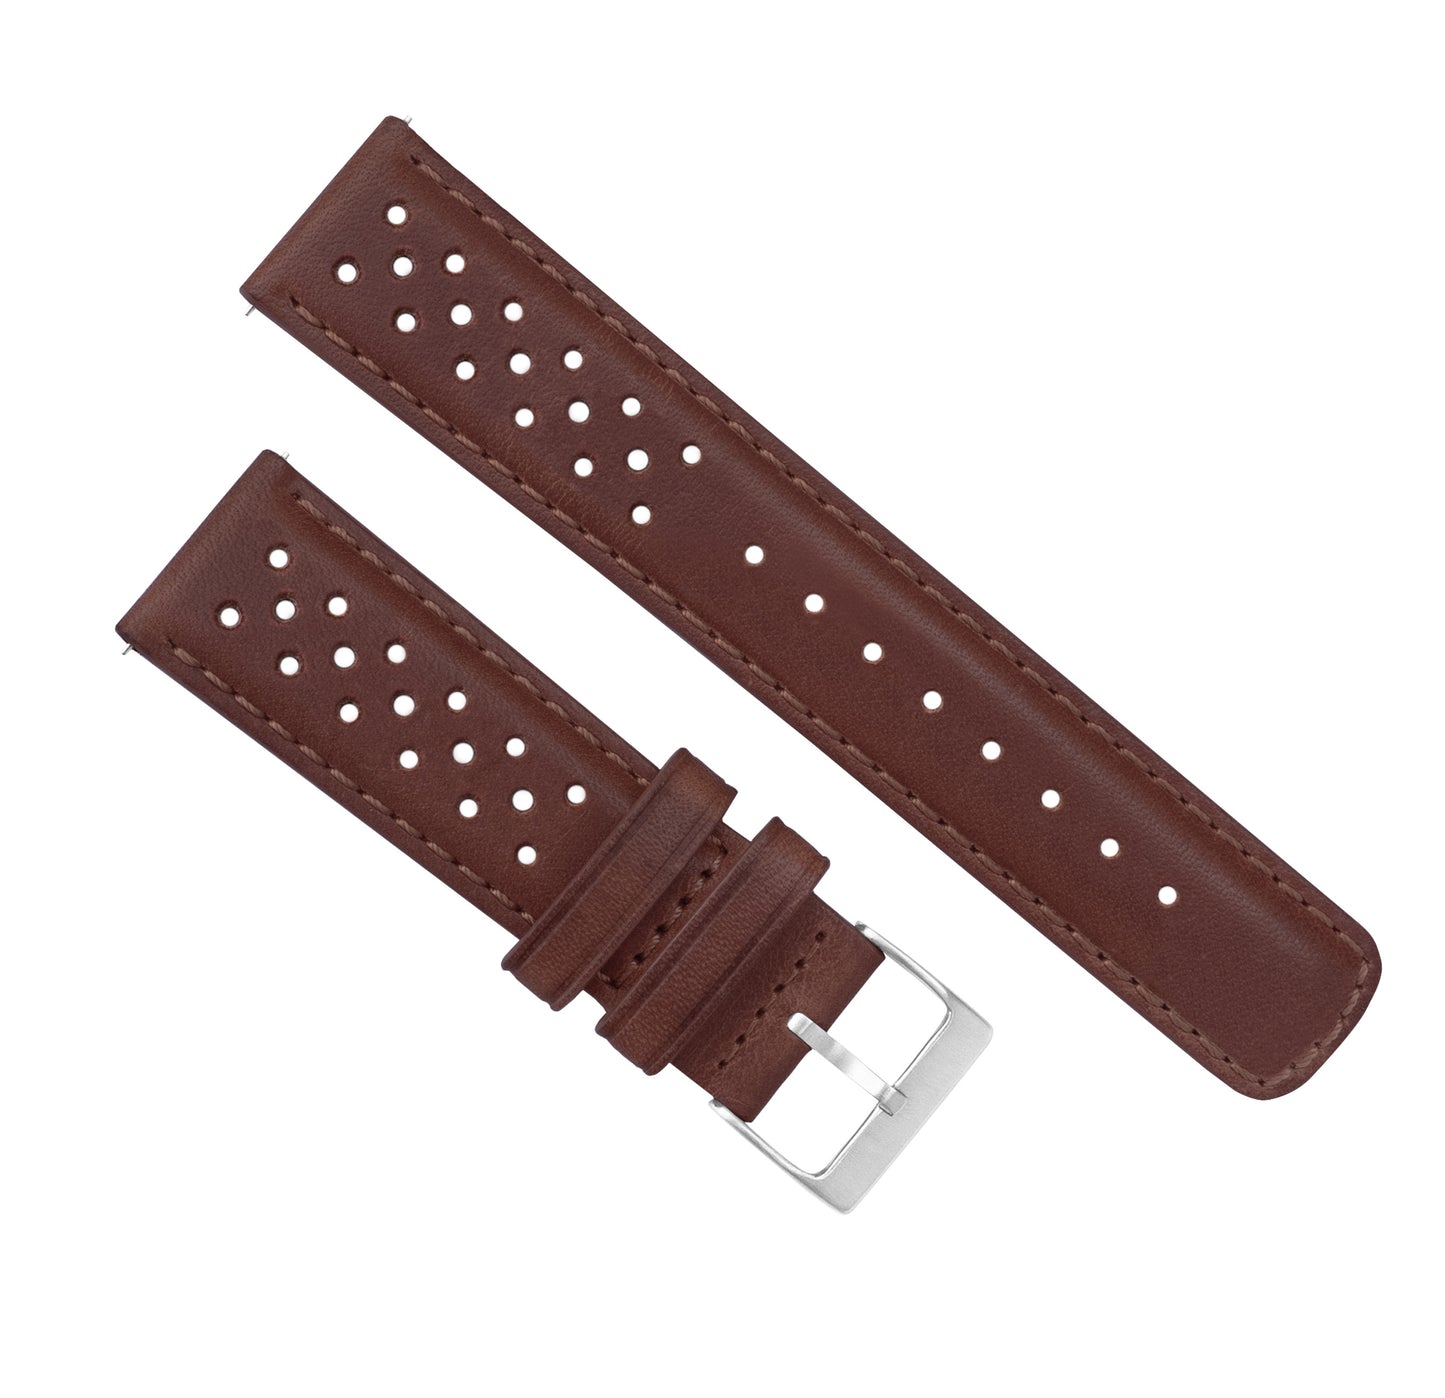 Gear Sport | Racing Horween Leather | Chocolate Brown - Barton Watch Bands